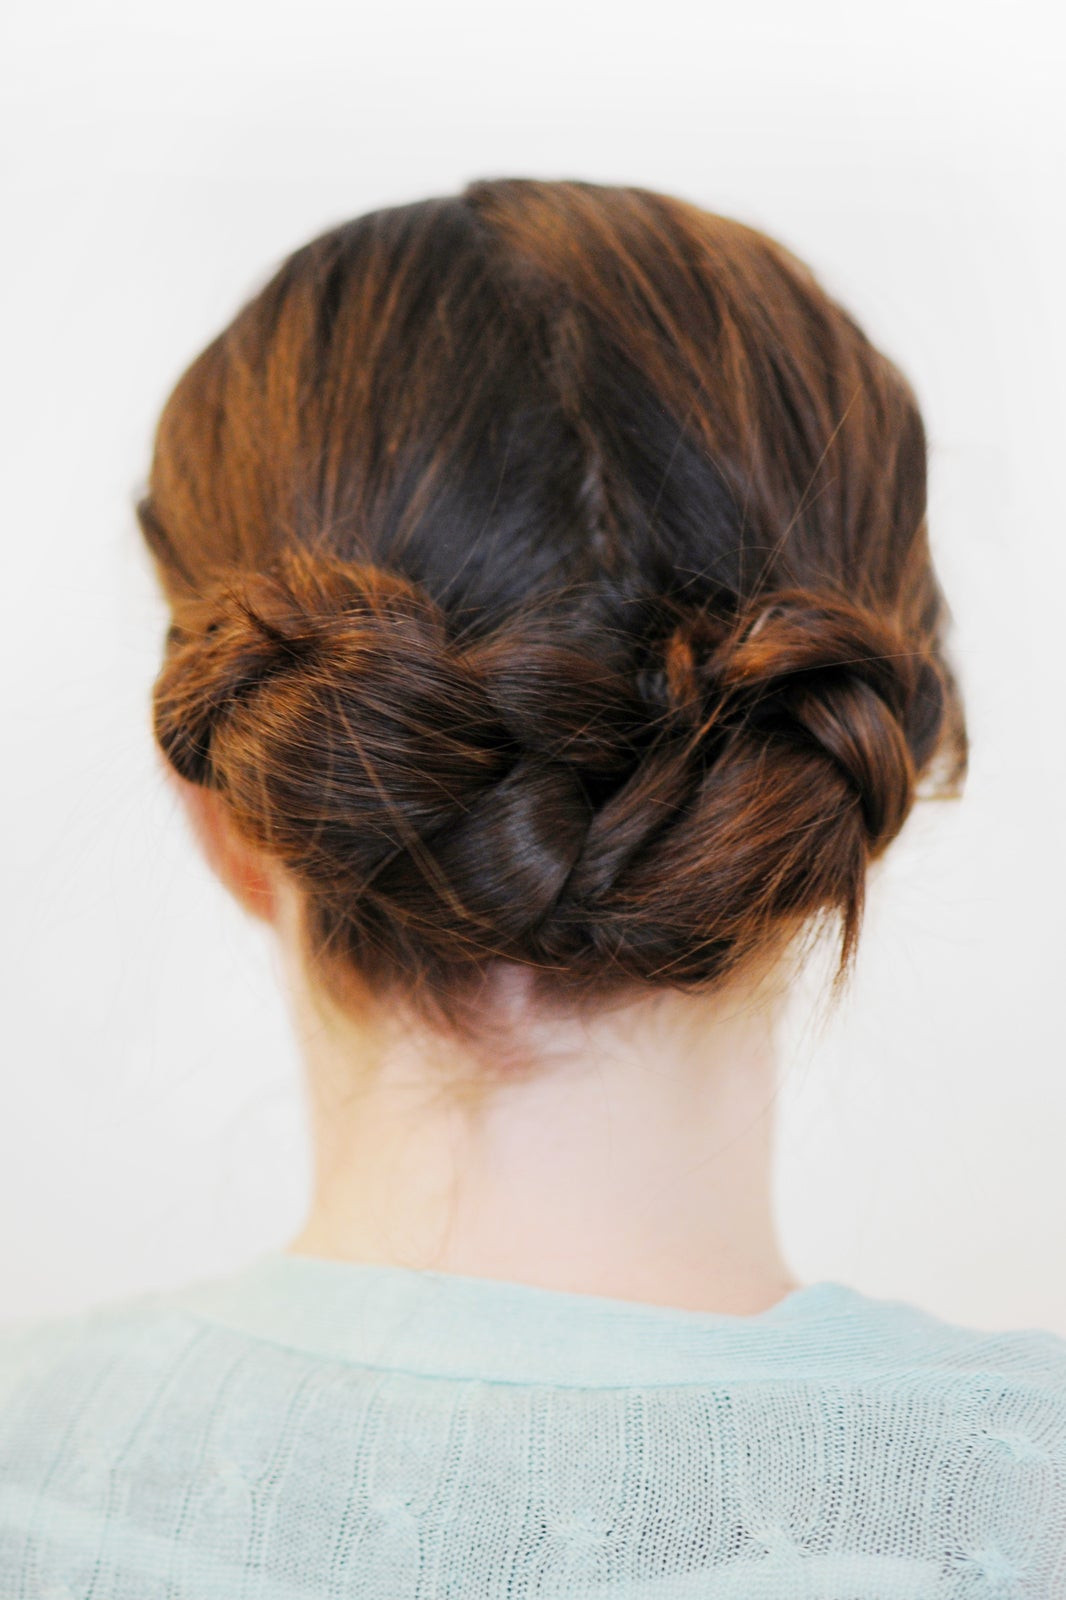 Hairstyle Updos Easy
 Braided Updos Easy Braid Updo Styles